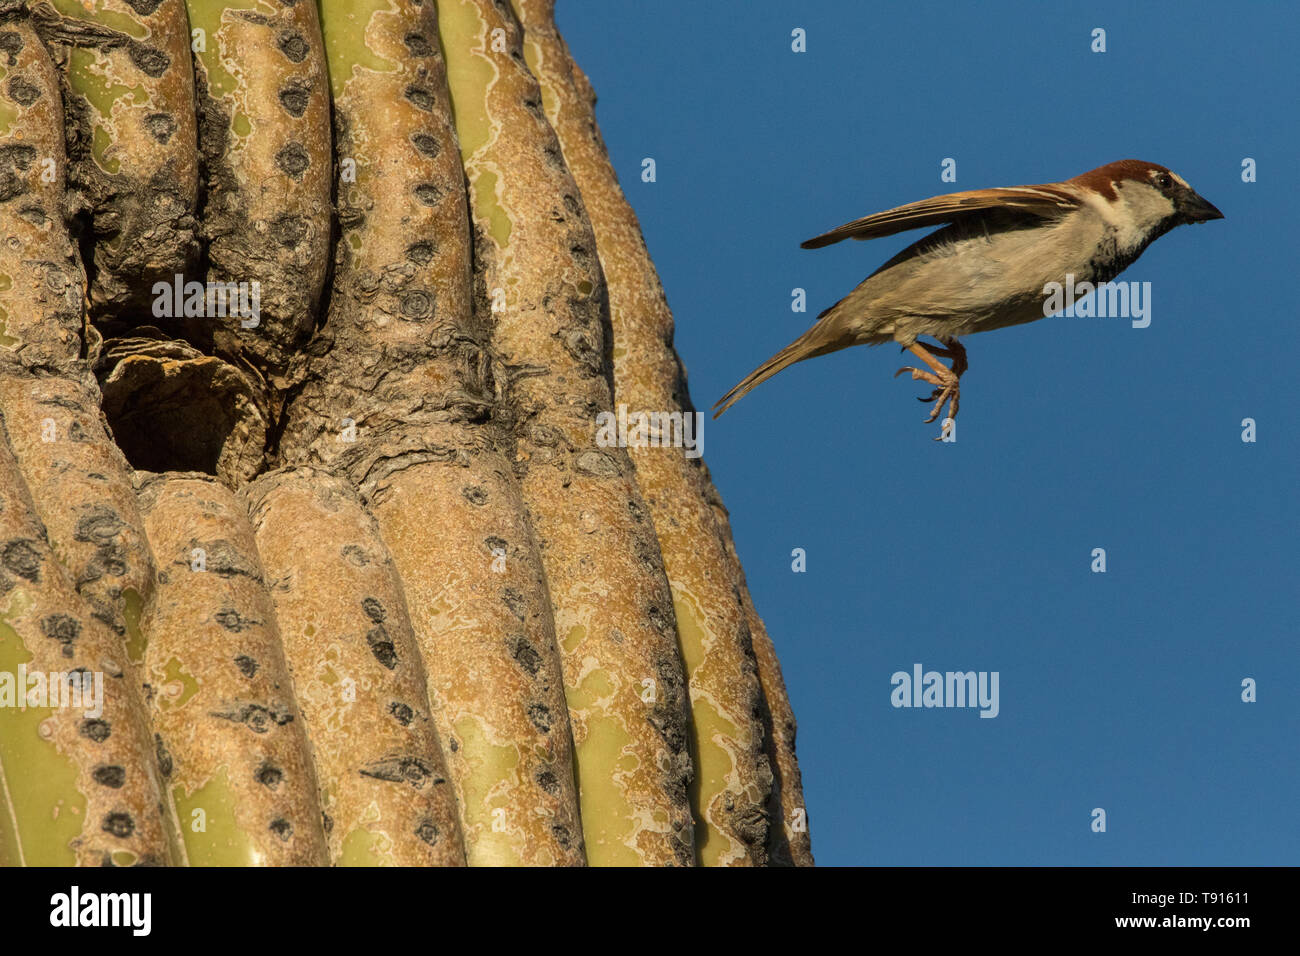 house sparrow (Passer domesticus), male, flying from nest in saguaro cactus, Sonoran desert Arizona, a species introduced to North America from Eurasi Stock Photo